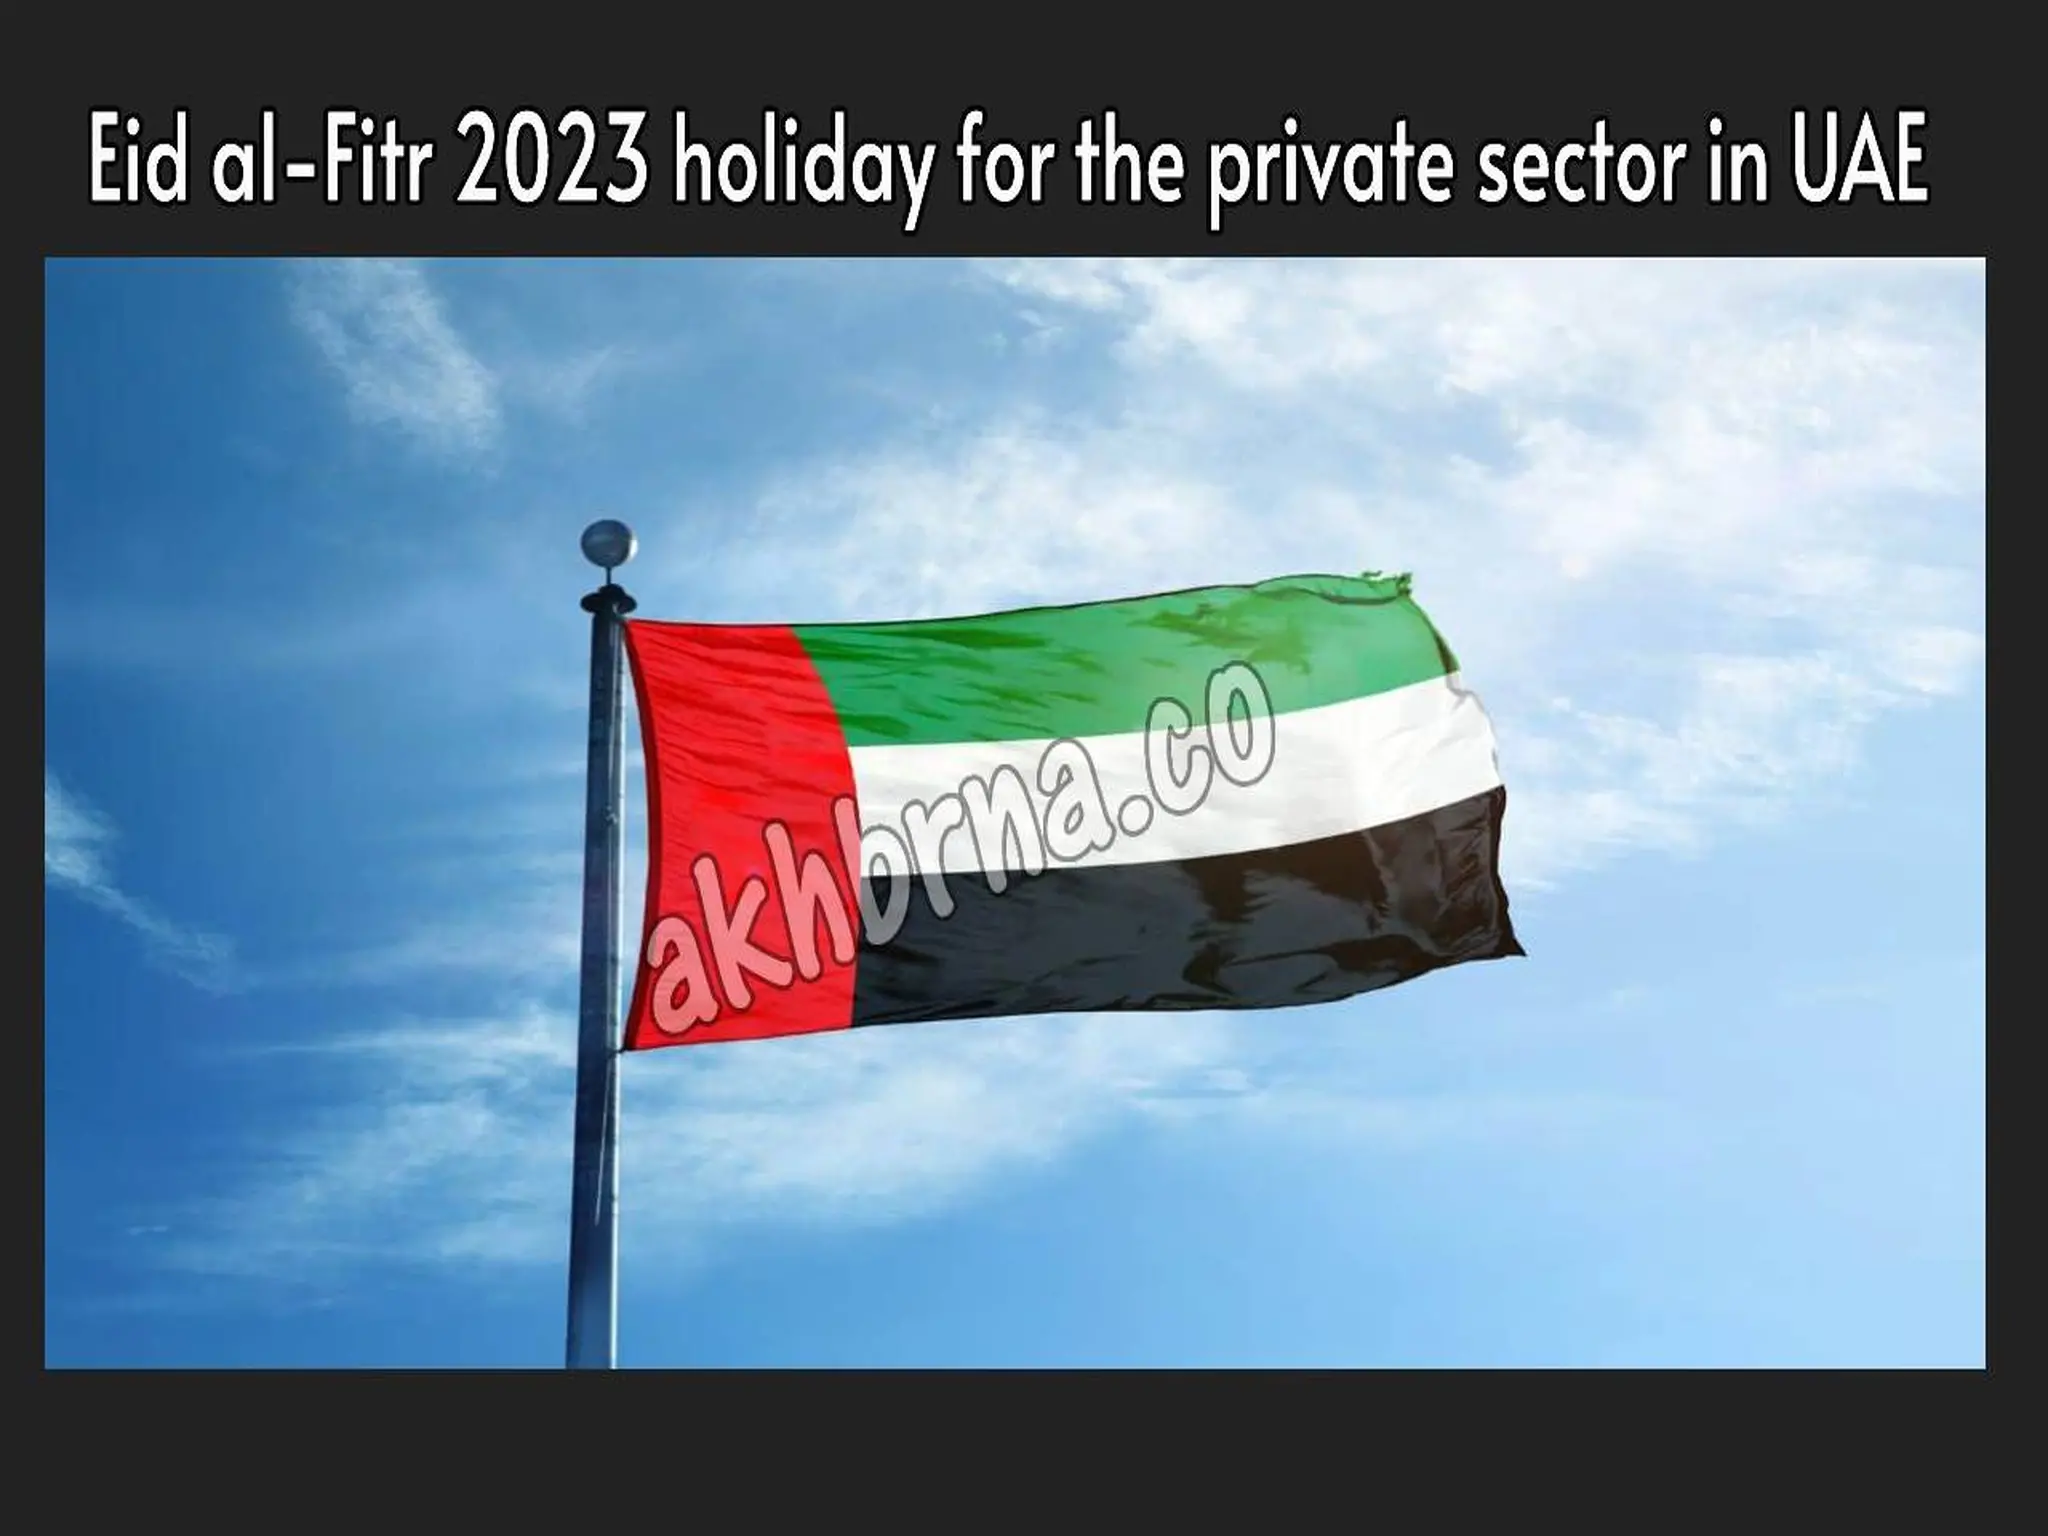 Urgent UAE announces Eid al-Fitr 2023 holiday for the private sector and government